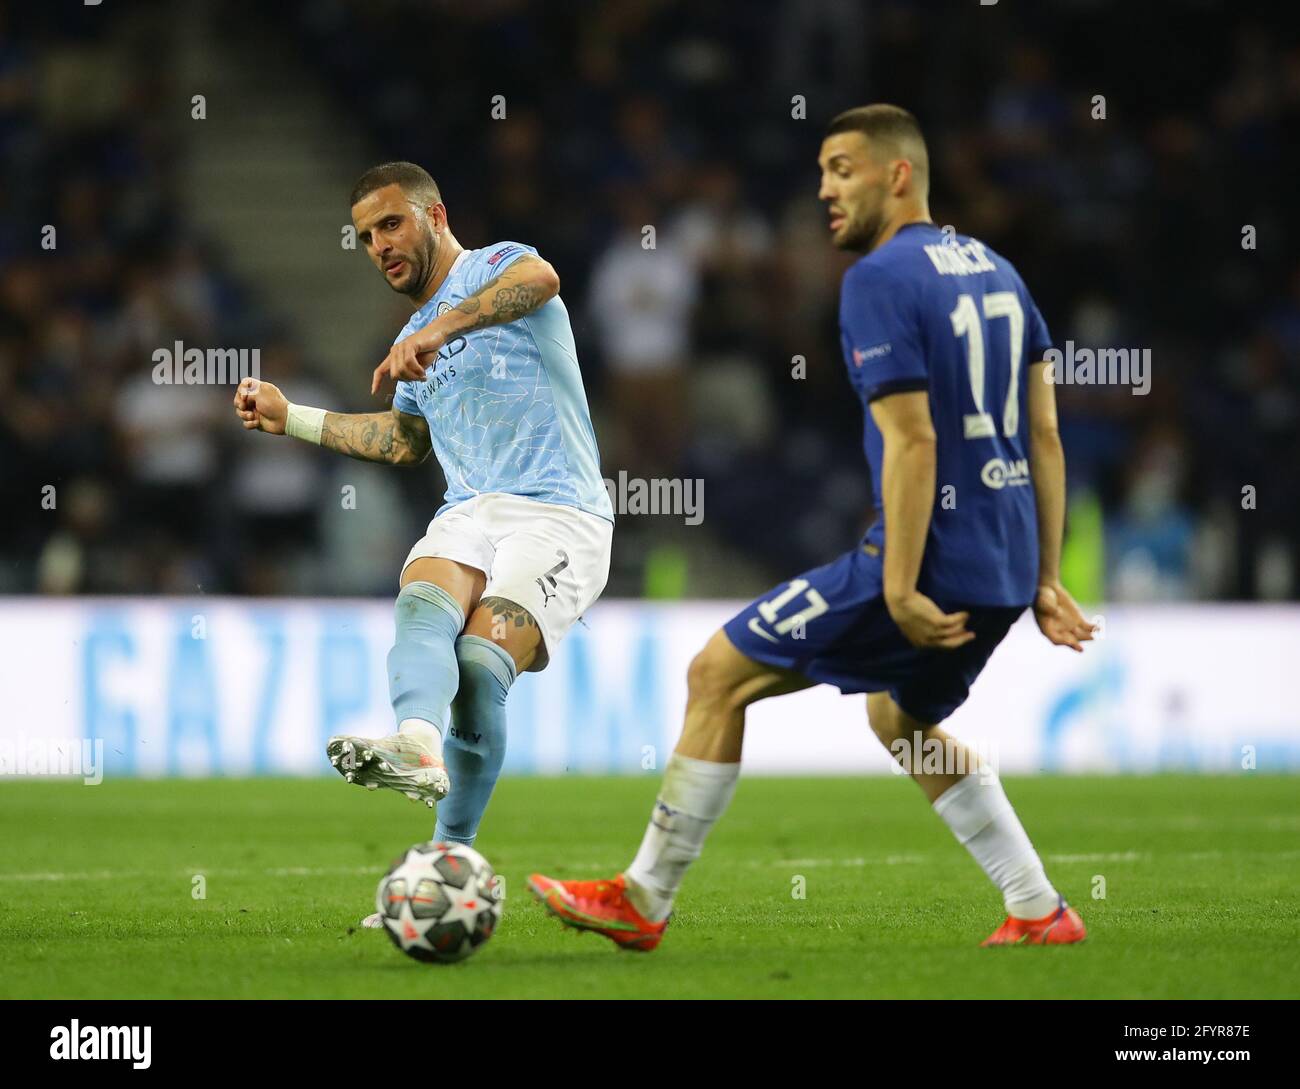 Porto, Portugal, 29th May 2021. Kyle Walker of Manchester City passes through Mateo Kovacic of Chelsea during the UEFA Champions League match at the Estadio do Dragao, Porto. Picture credit should read: David Klein / Sportimage Stock Photo